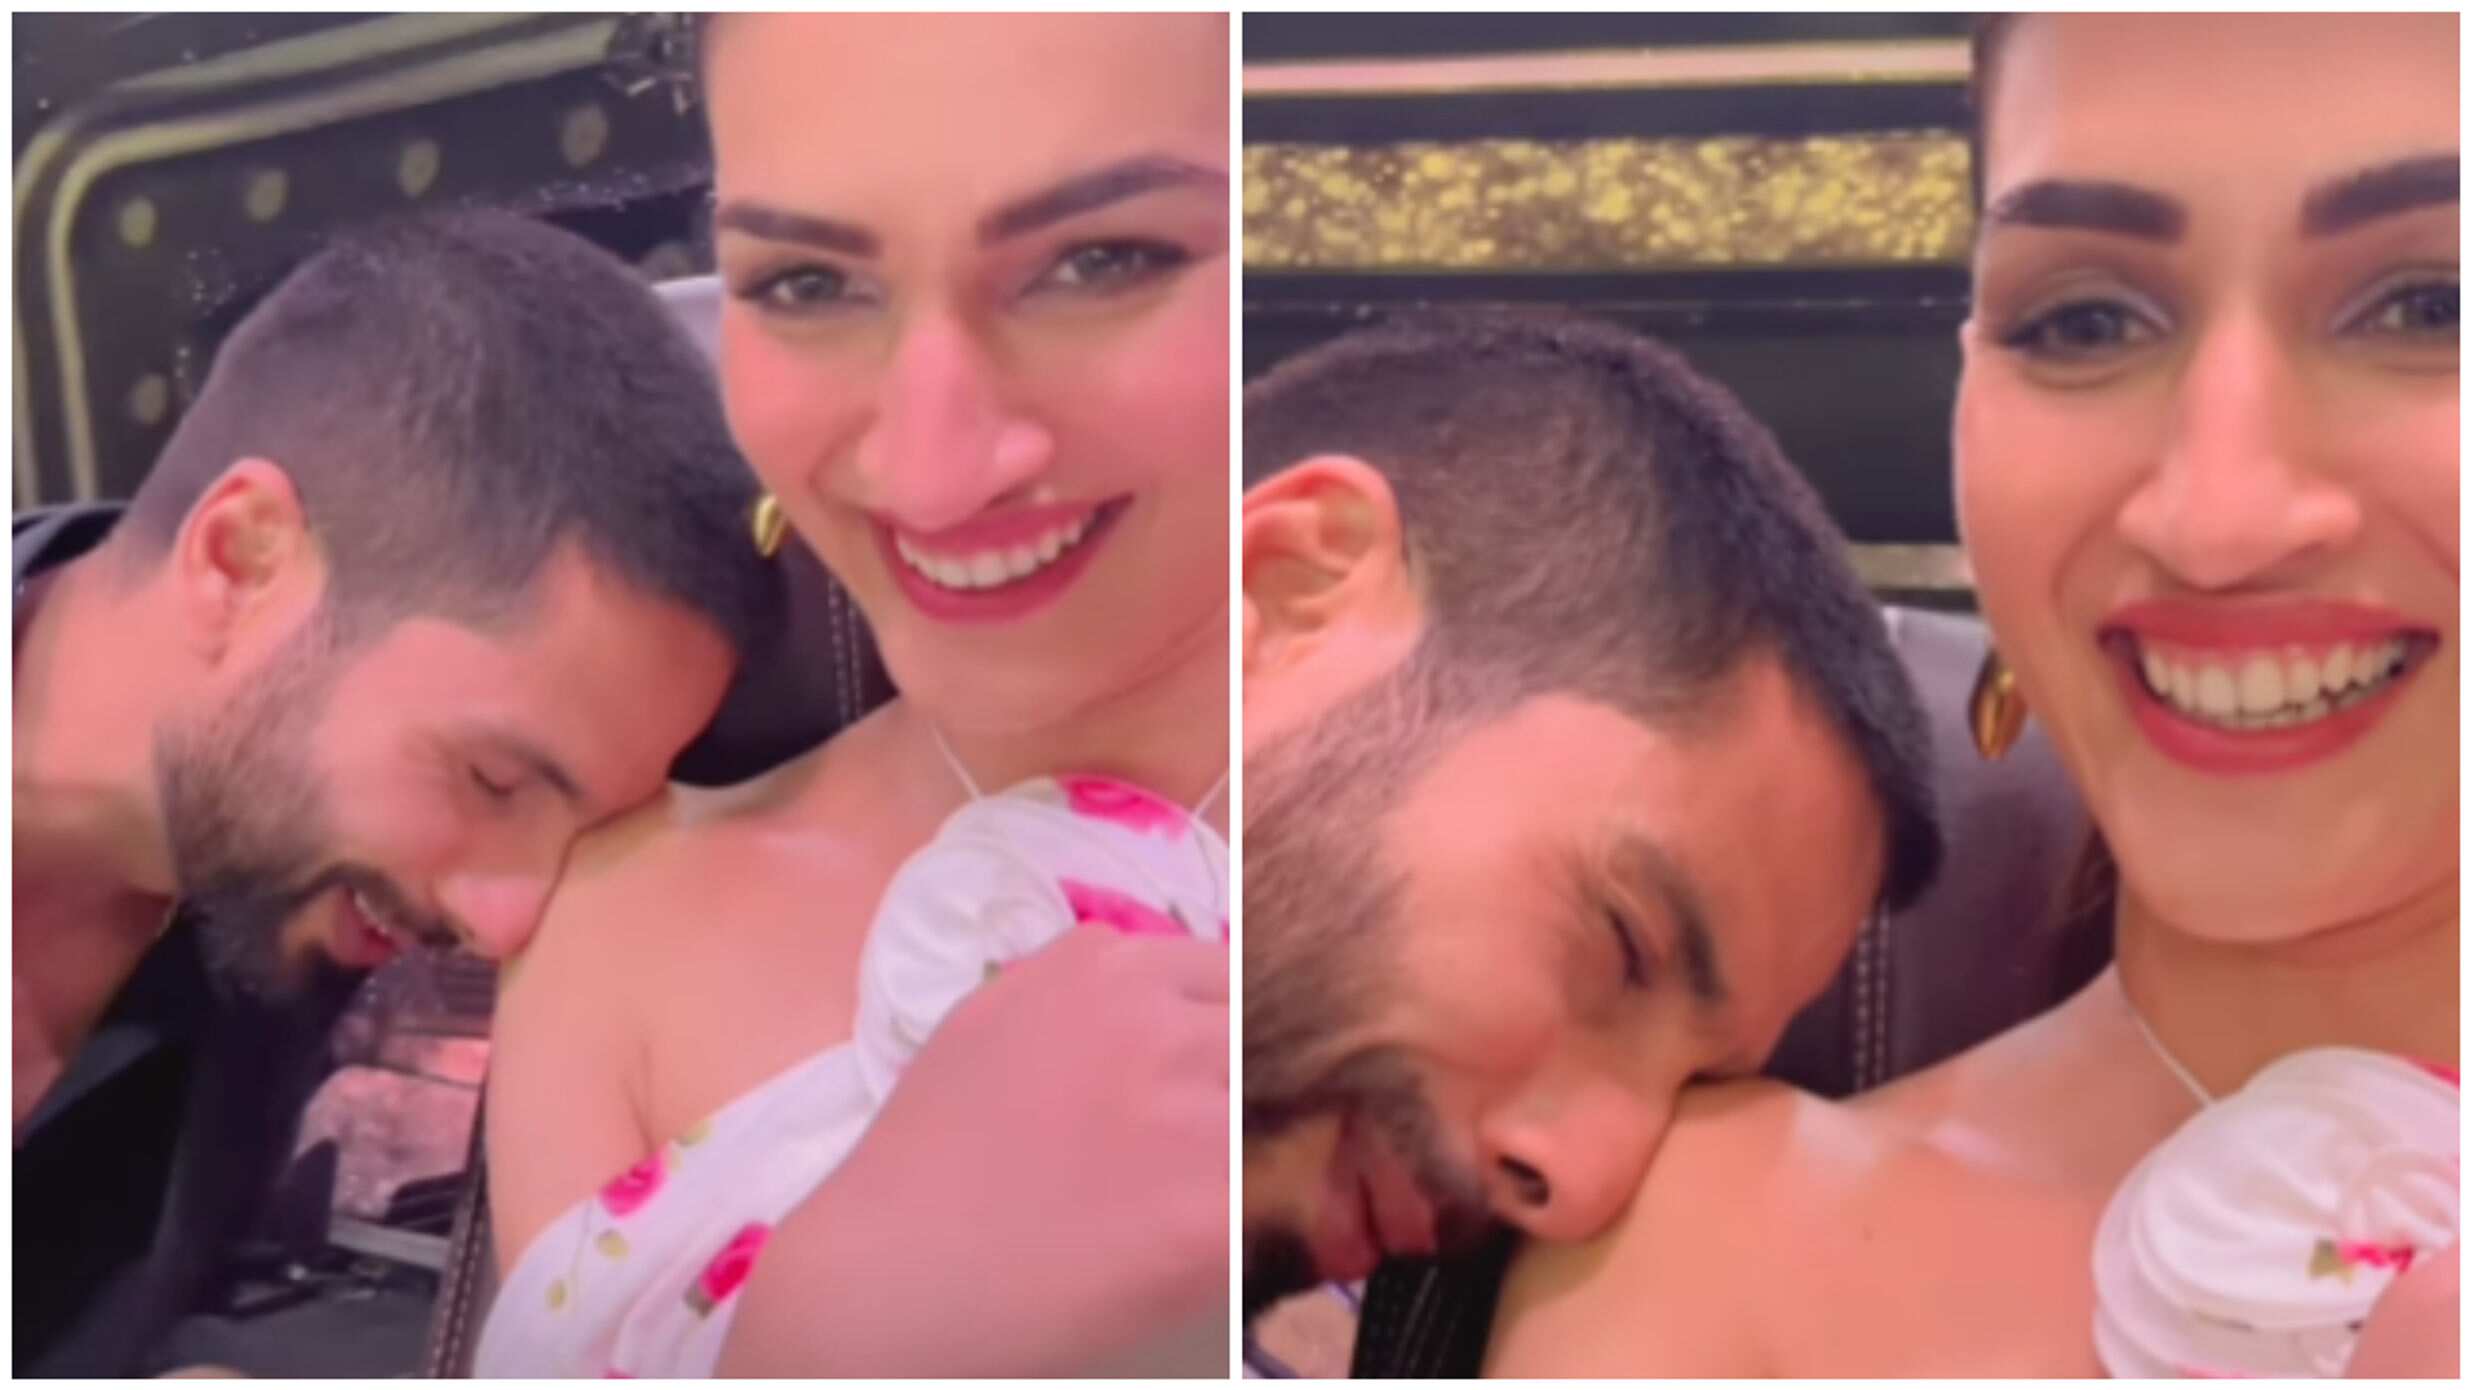 https://www.mobilemasala.com/film-gossip/Shahid-Kapoor-Gives-An-Epic-Expression-While-Kriti-Sanon-Gets-Tangled-Up-Just-Days-Before-Teri-Baton-Mein-Aisa-Uljha-Jiyas-Release---Watch-i212494